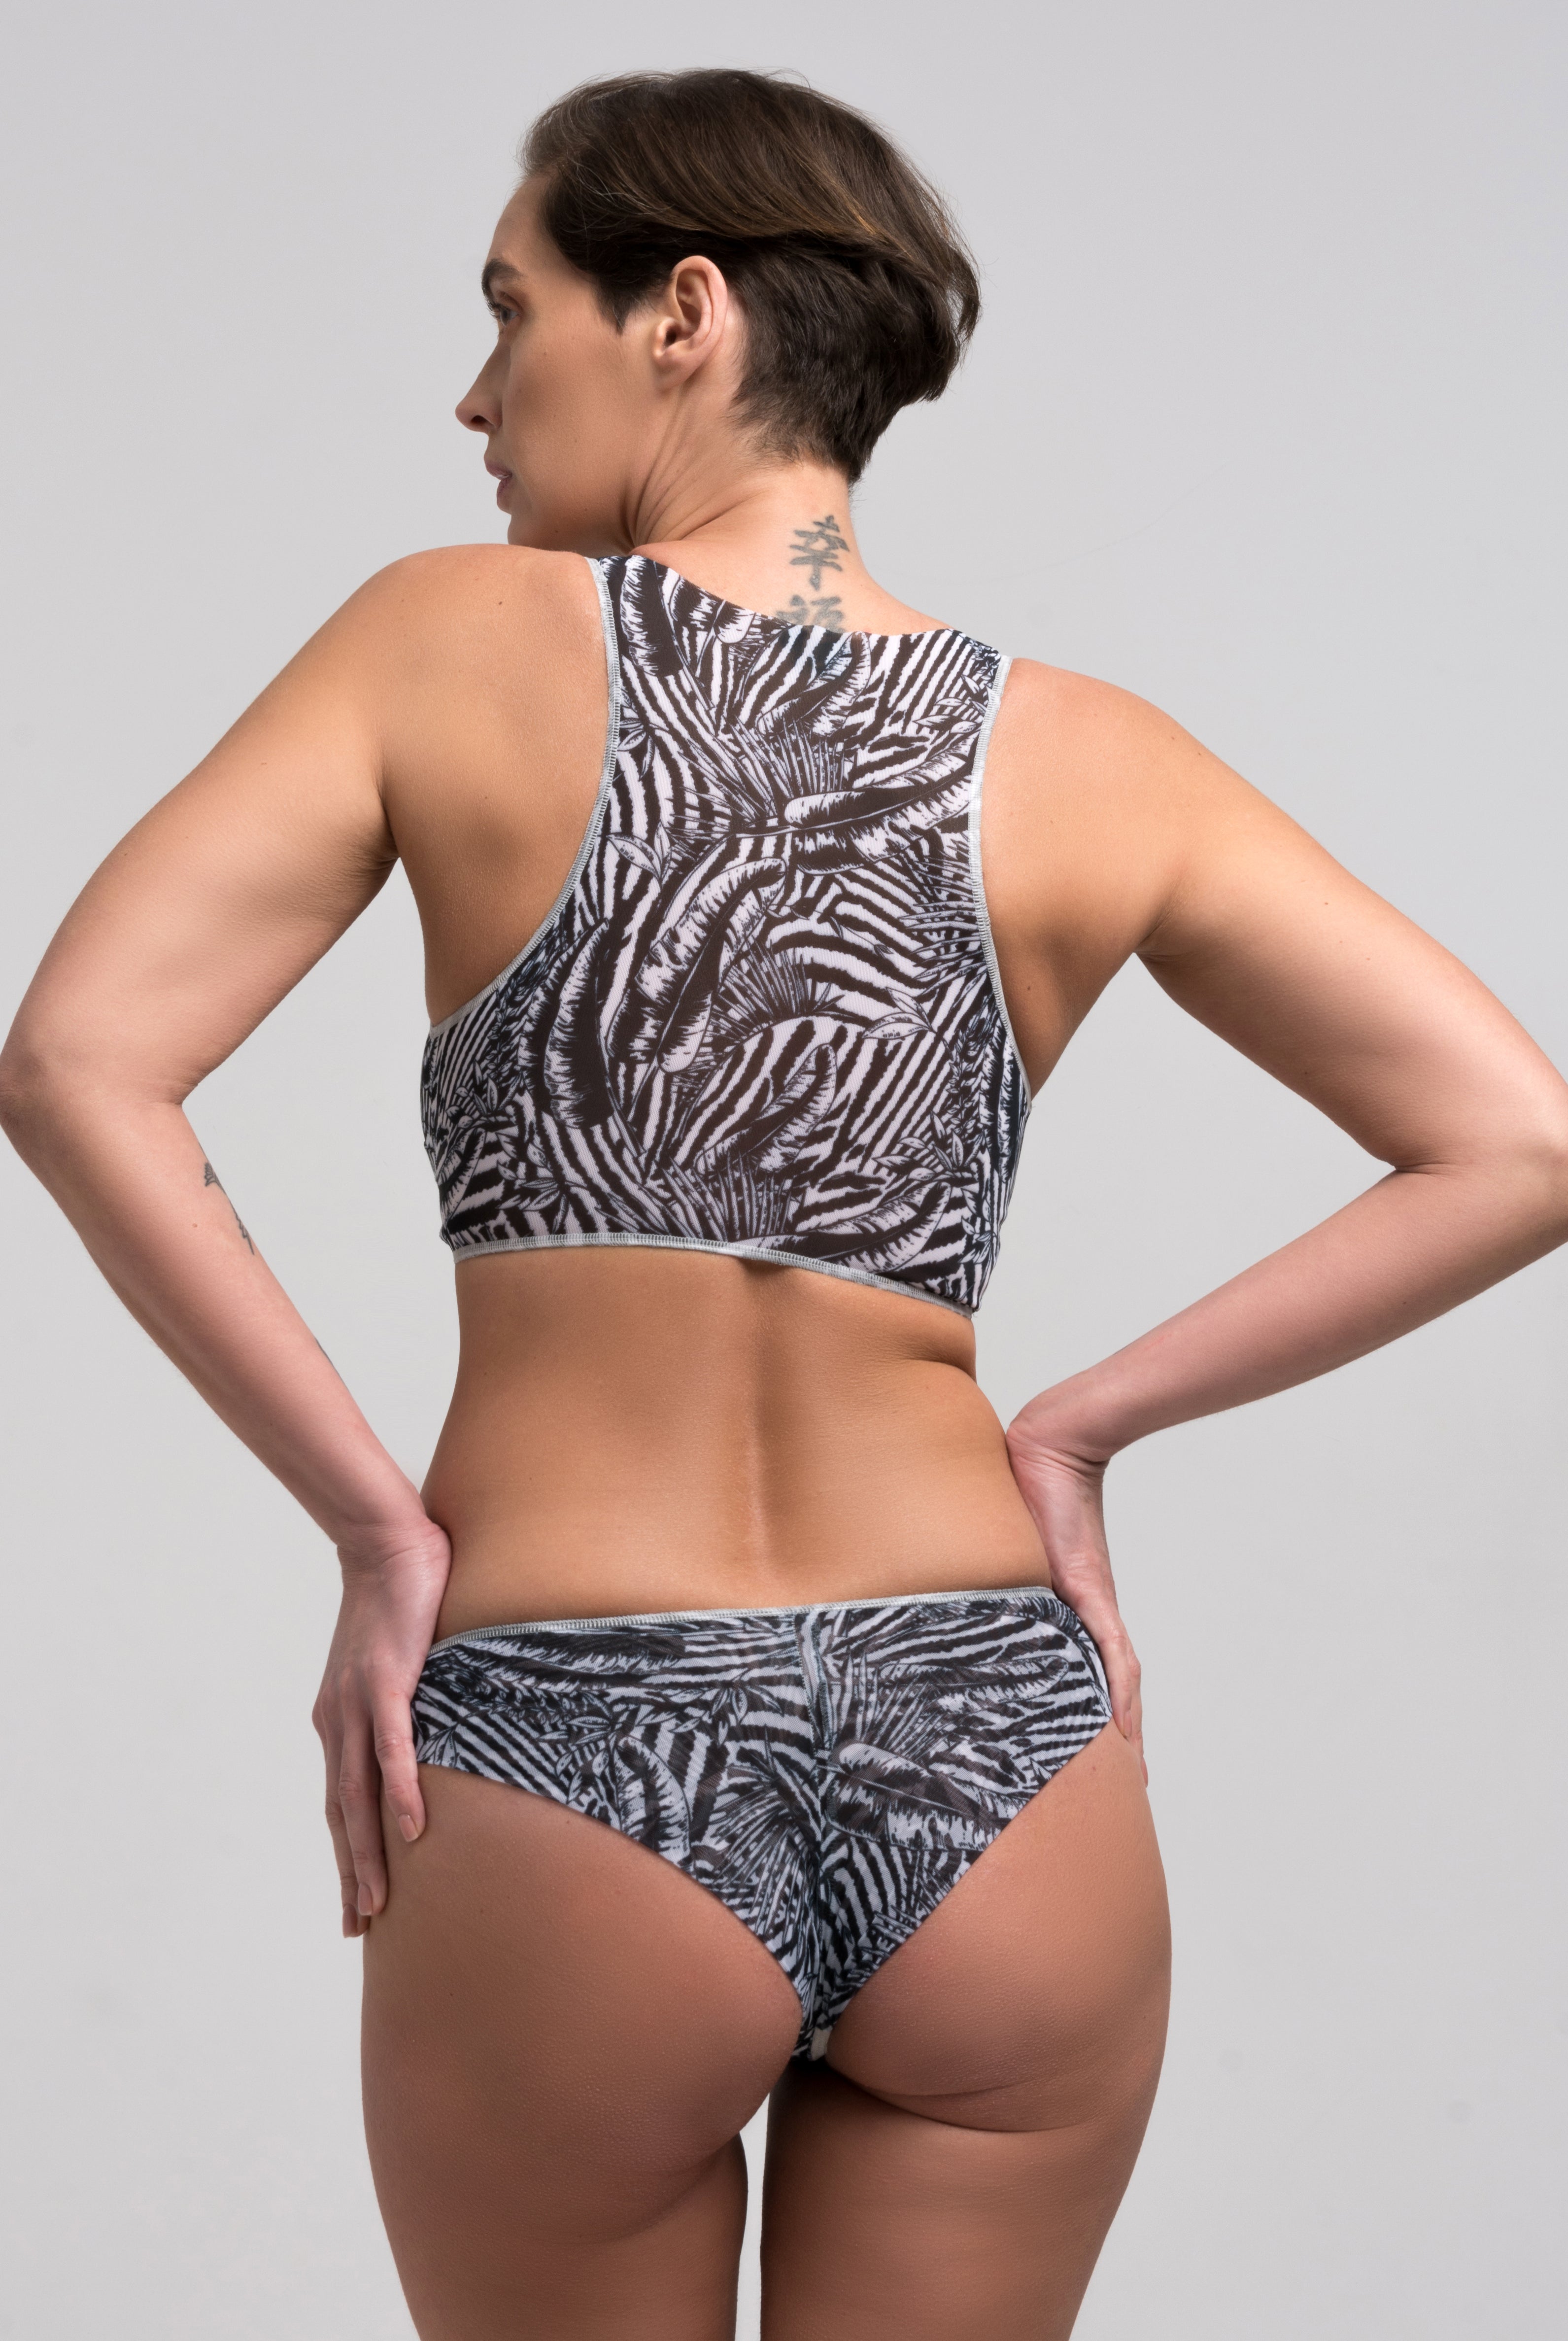 This file features sustainable tan-through smart swimsuits adorned with a trendy Fake Zebra print. Included is a stylish Brazilian bikini offering SPF35 protection, representing a new classic beachwear style